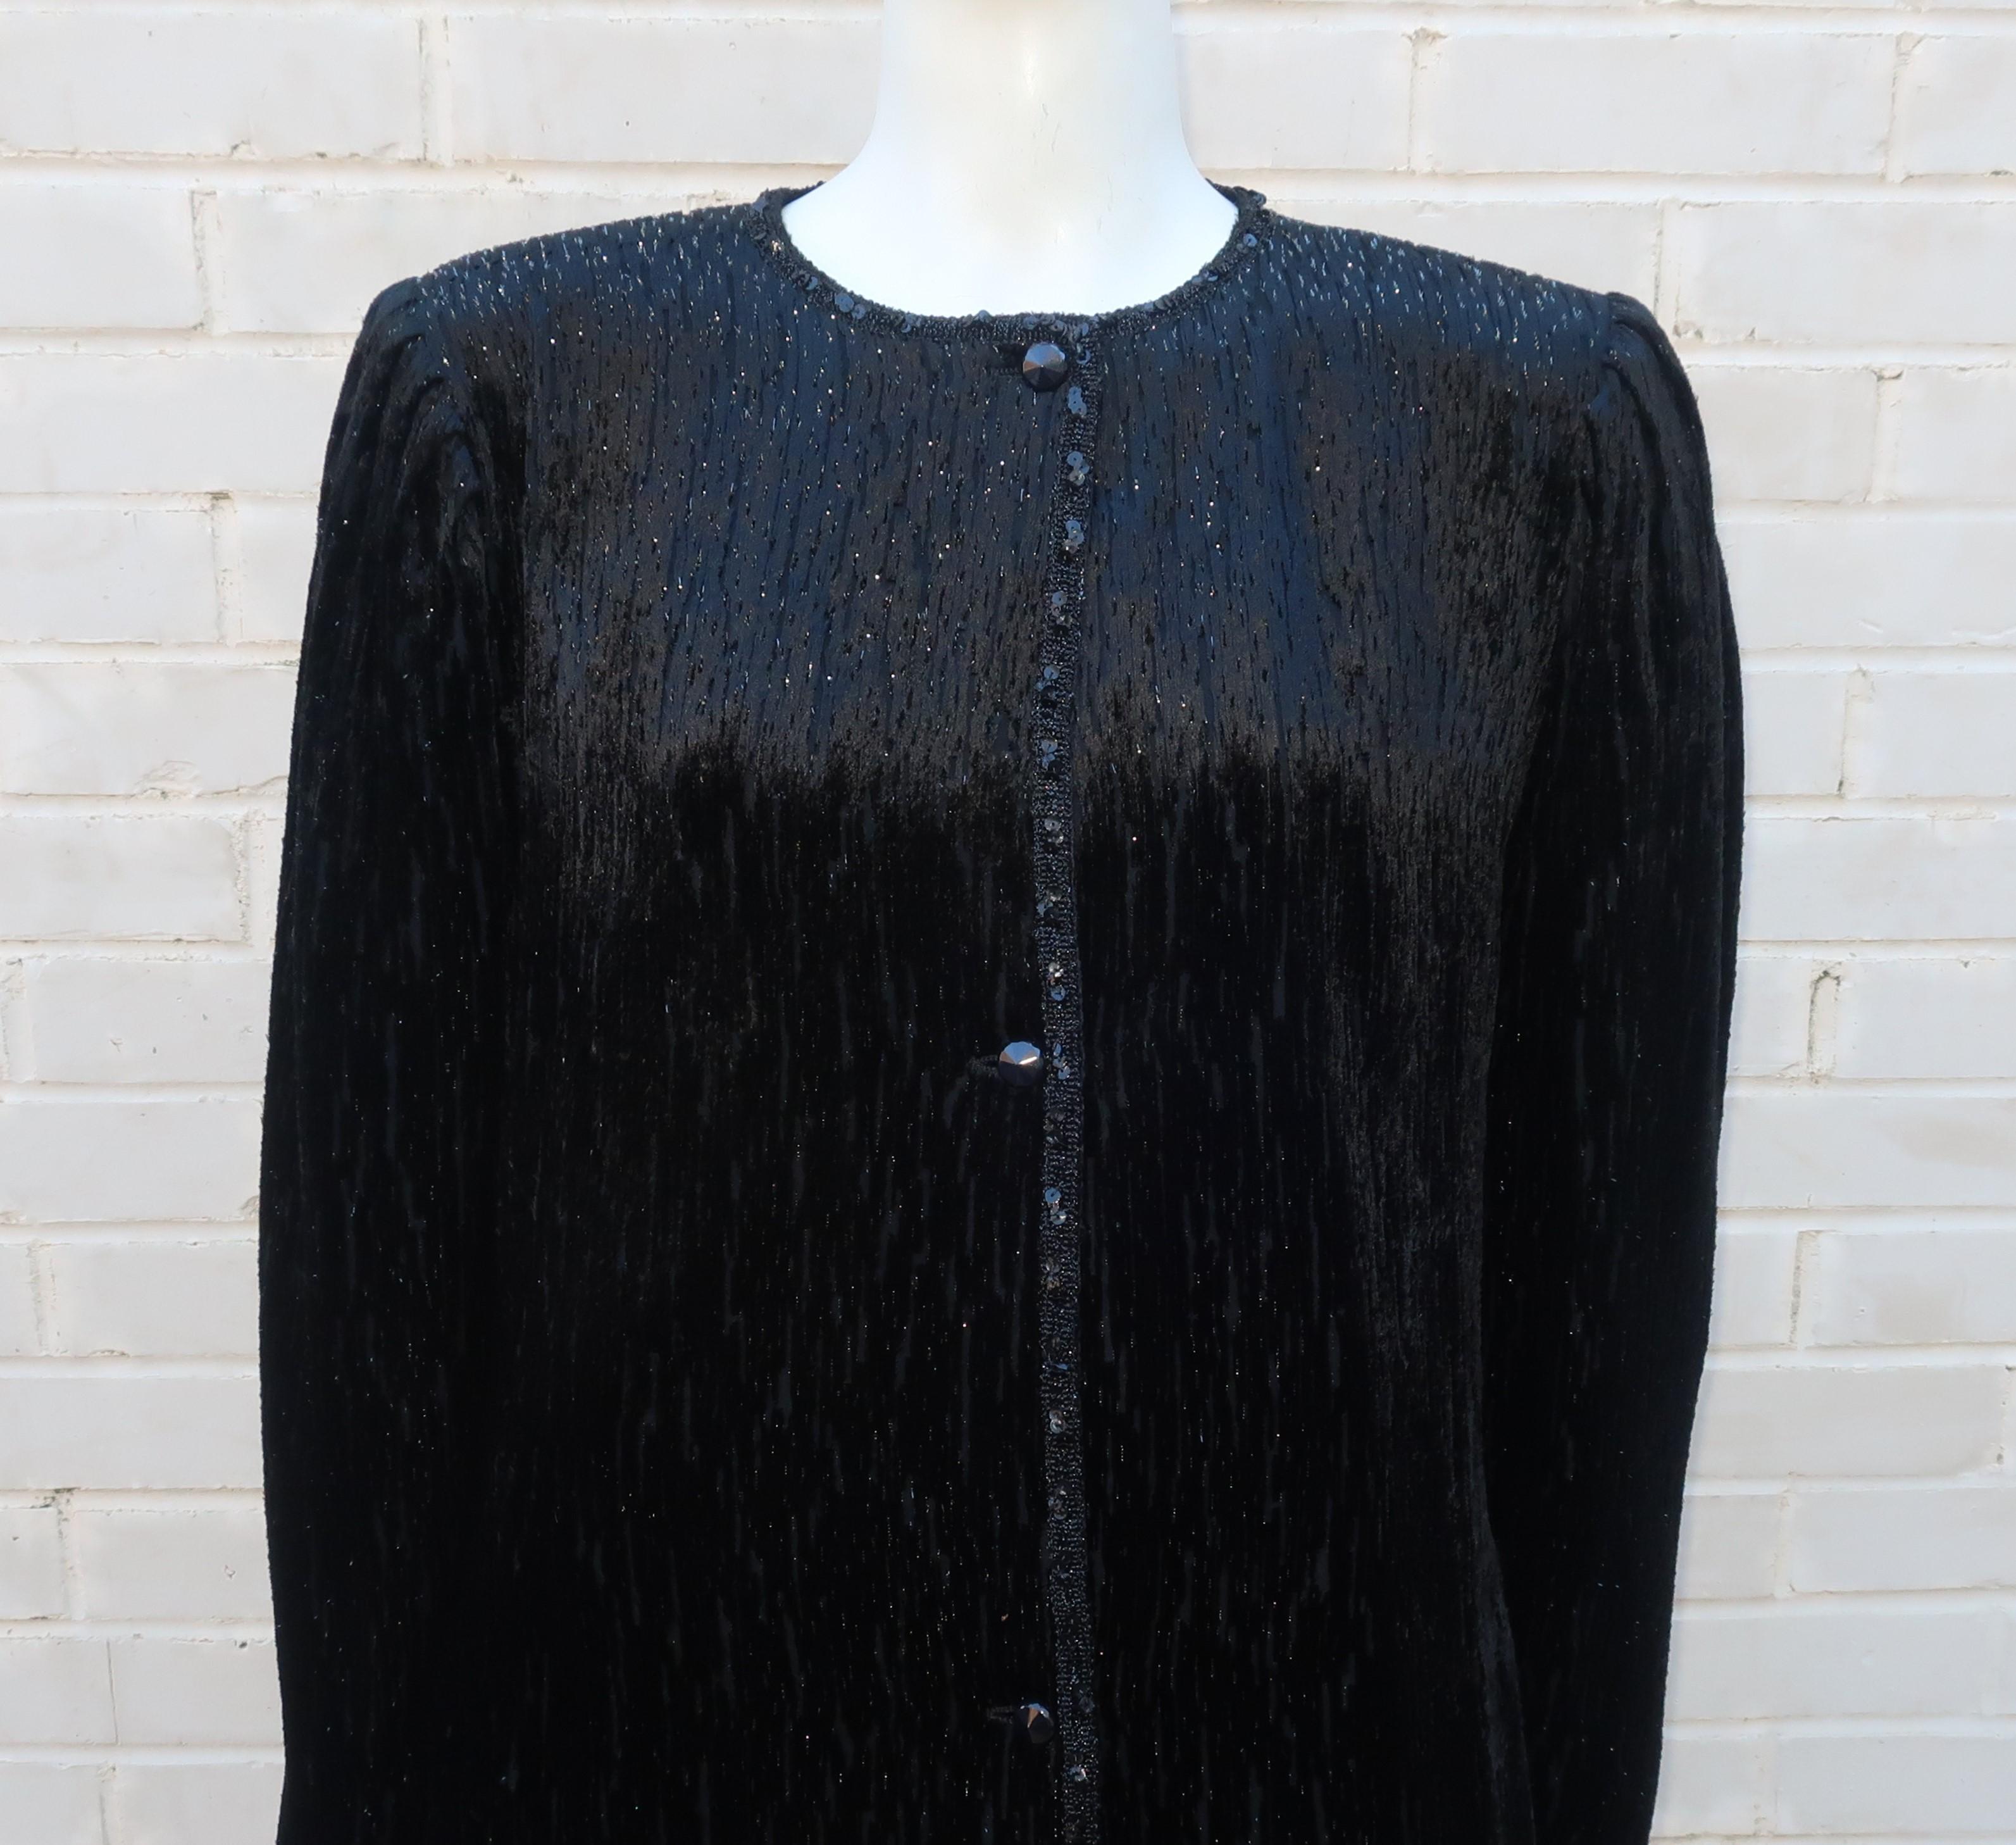 1980's Emanuel Ungaro skirt suit consisting of a skirt and matching coat in a cut velvet fabric accented by metallic threading.  The collarless coat has a modified asymmetrical button front closure, side pockets and a sequin embellished braid trim. 